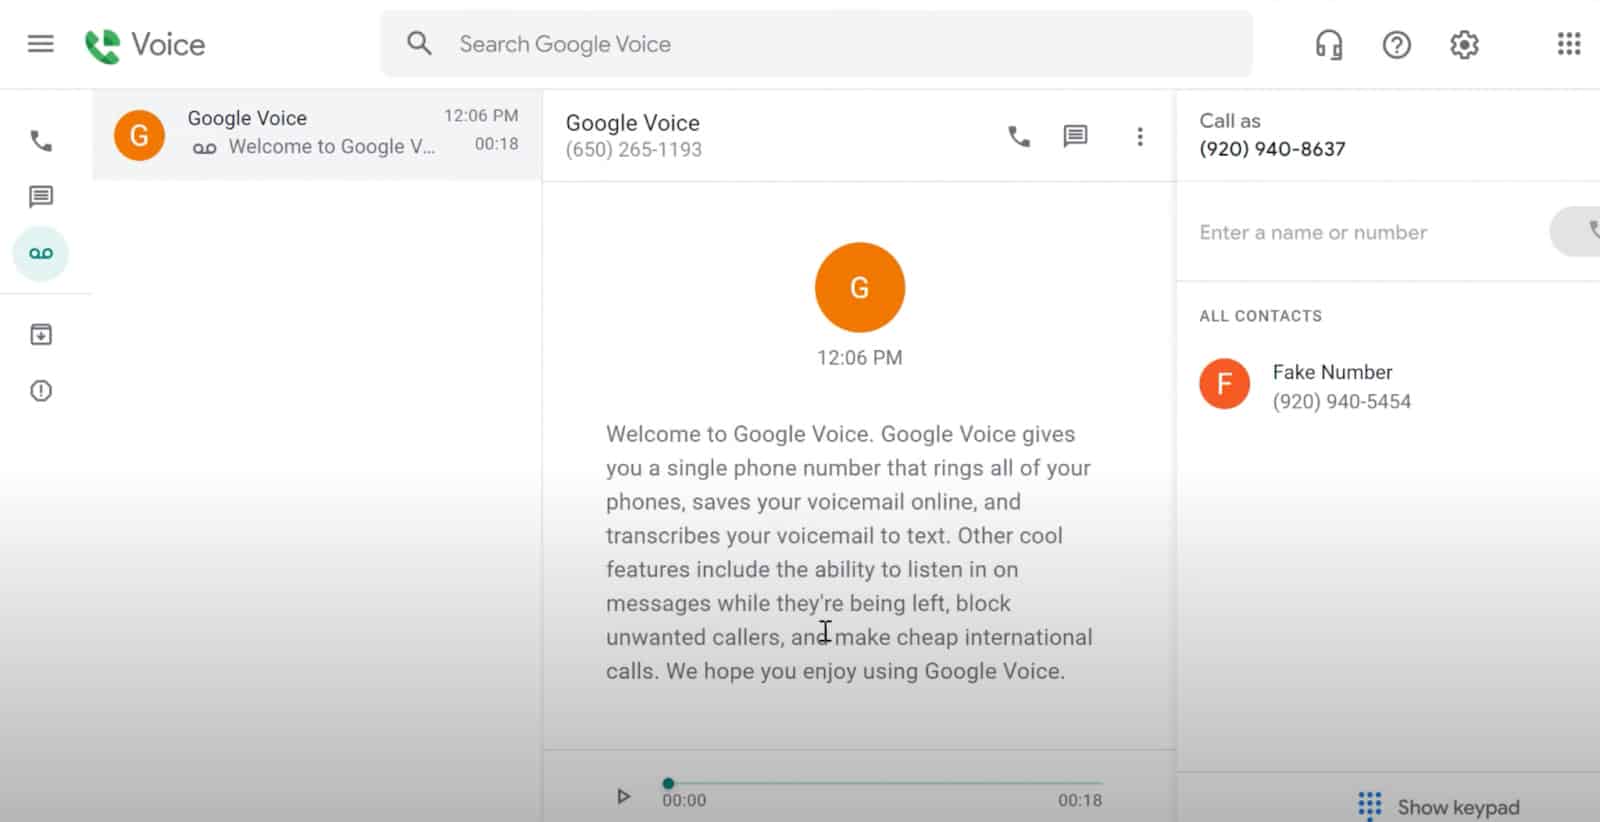 Google Voice translates voicemails into text.